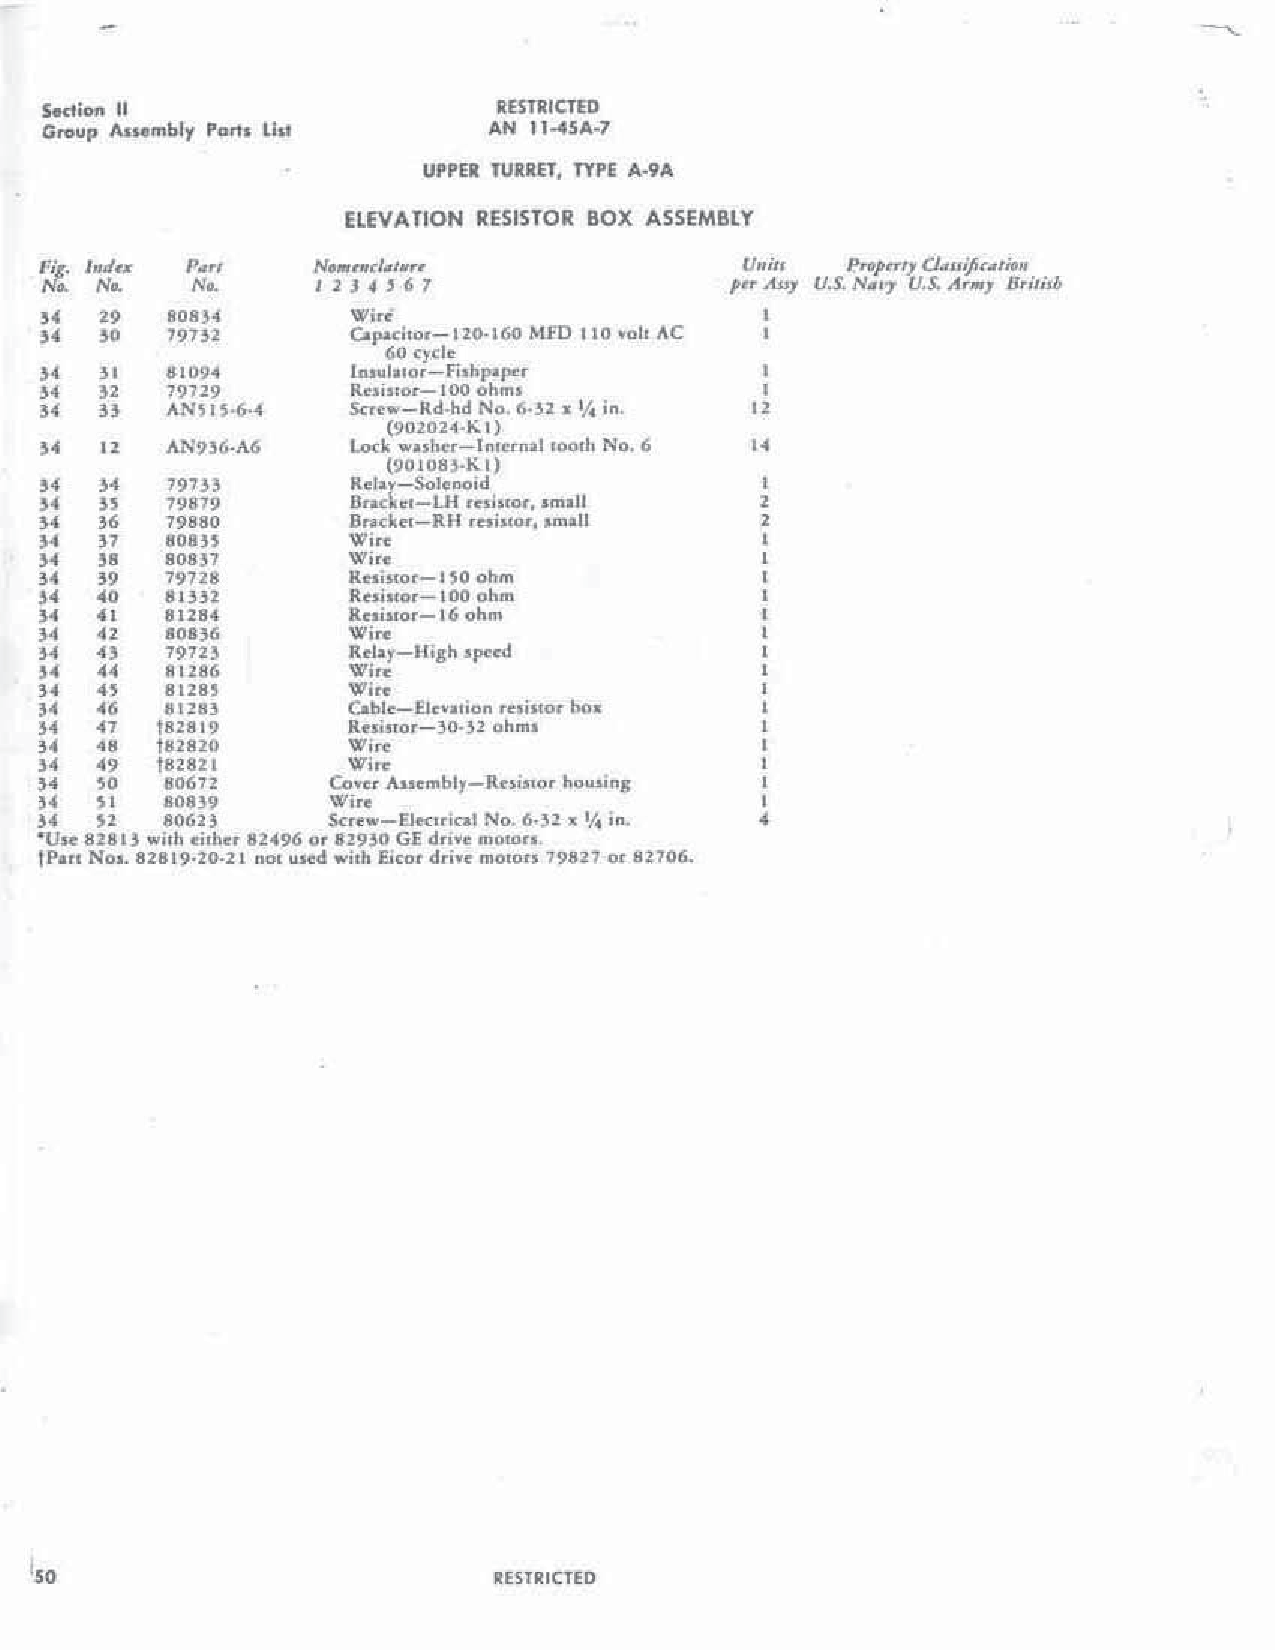 Sample page 52 from AirCorps Library document: Turret Parts Catalog - Army A-9A, Navy 250CE-3